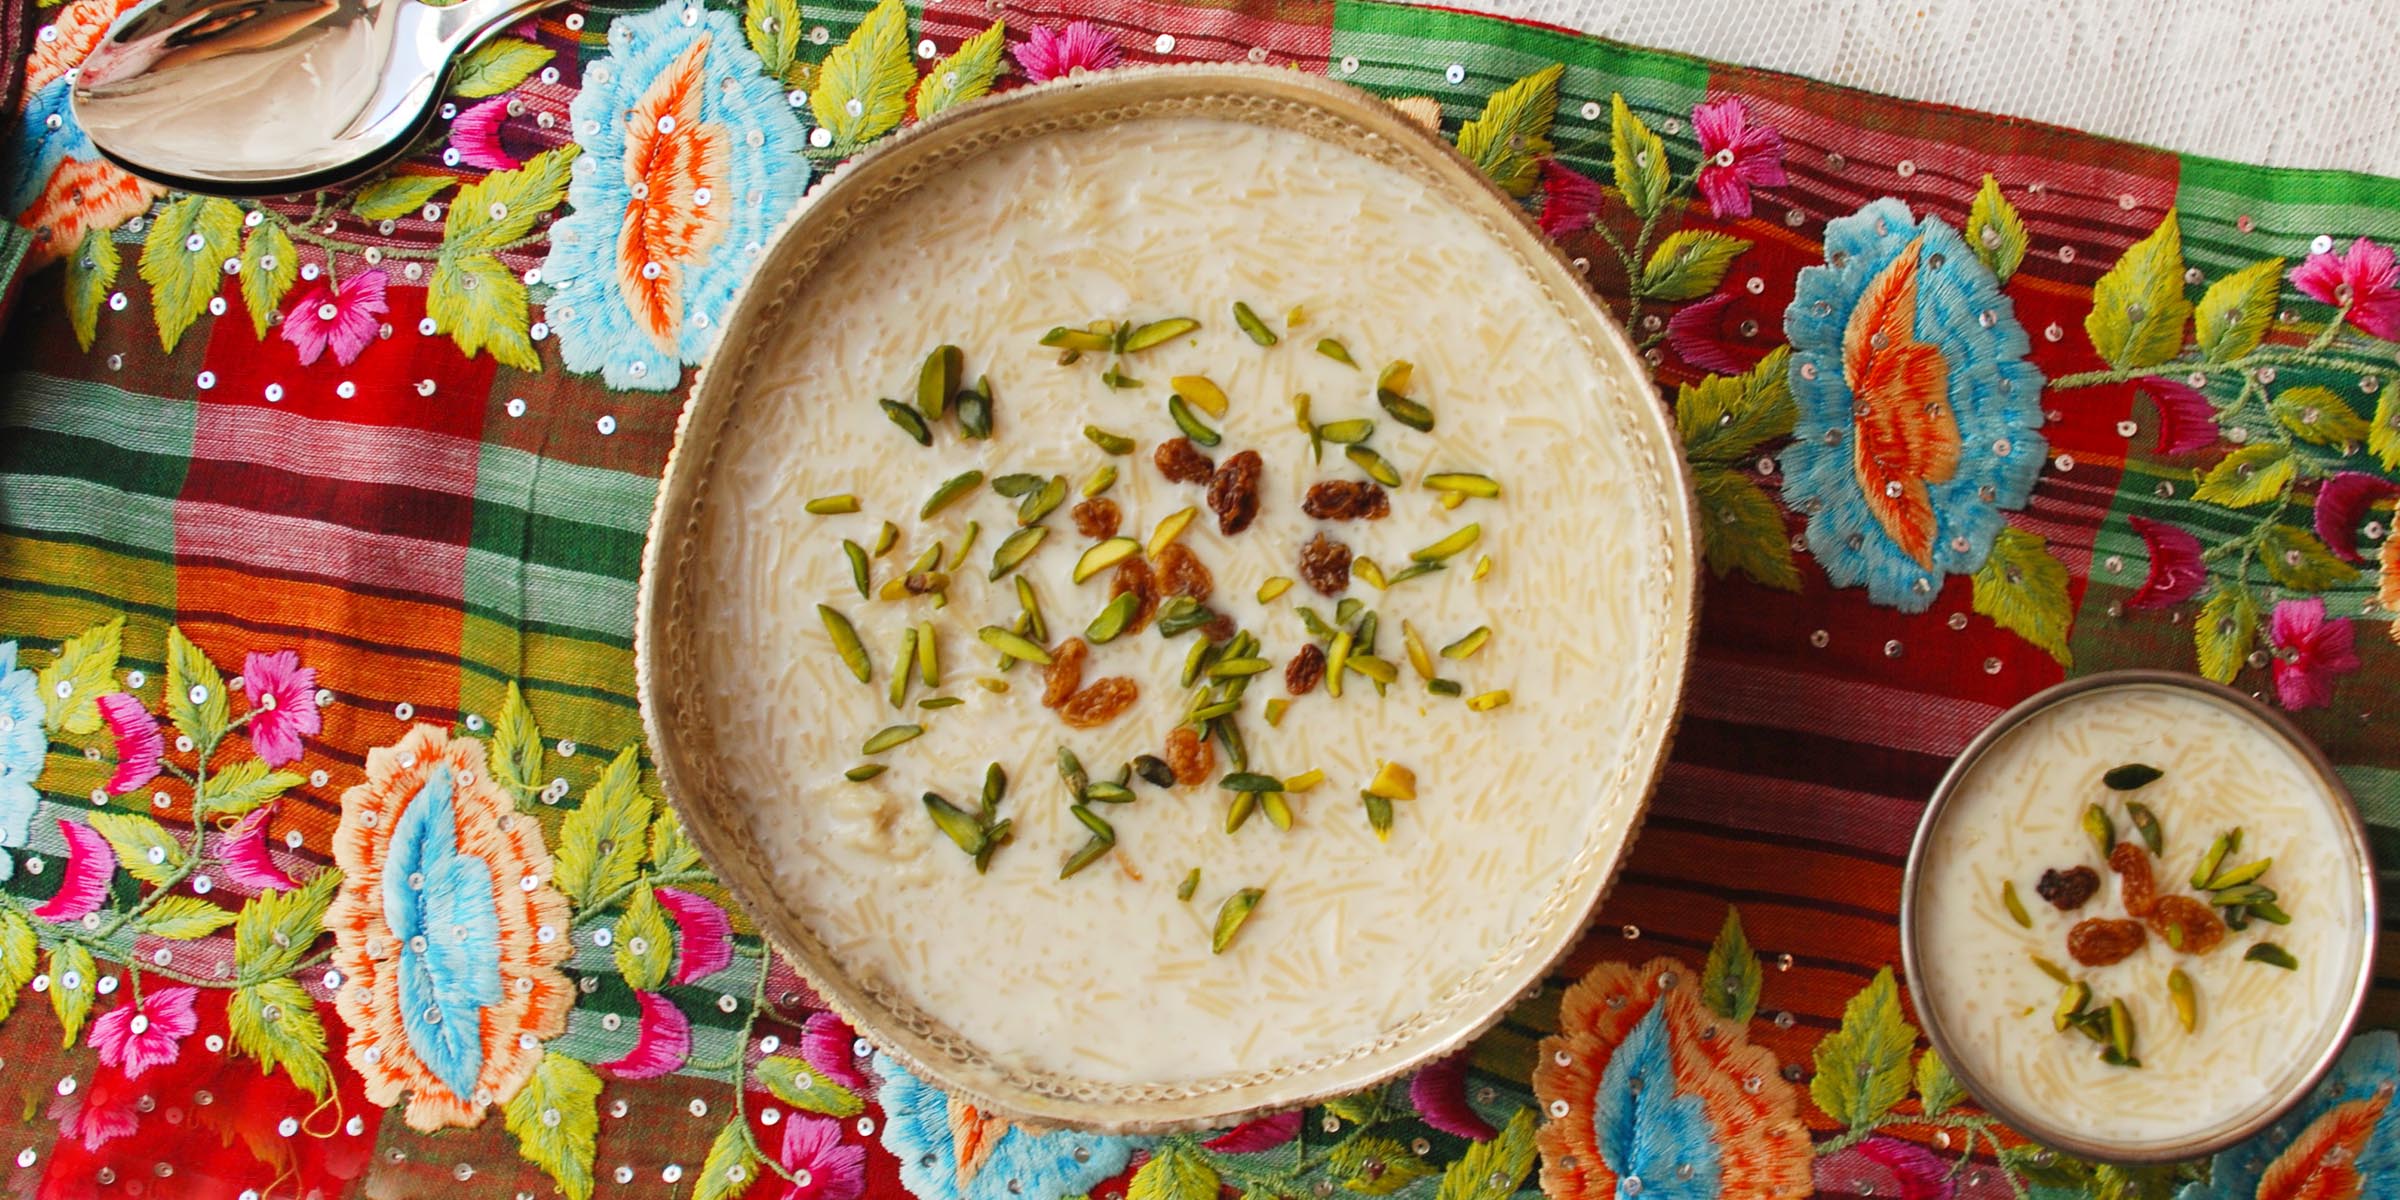 Dainty Rice  4 Simple Diwali rice cooker inspirations - Dainty Rice